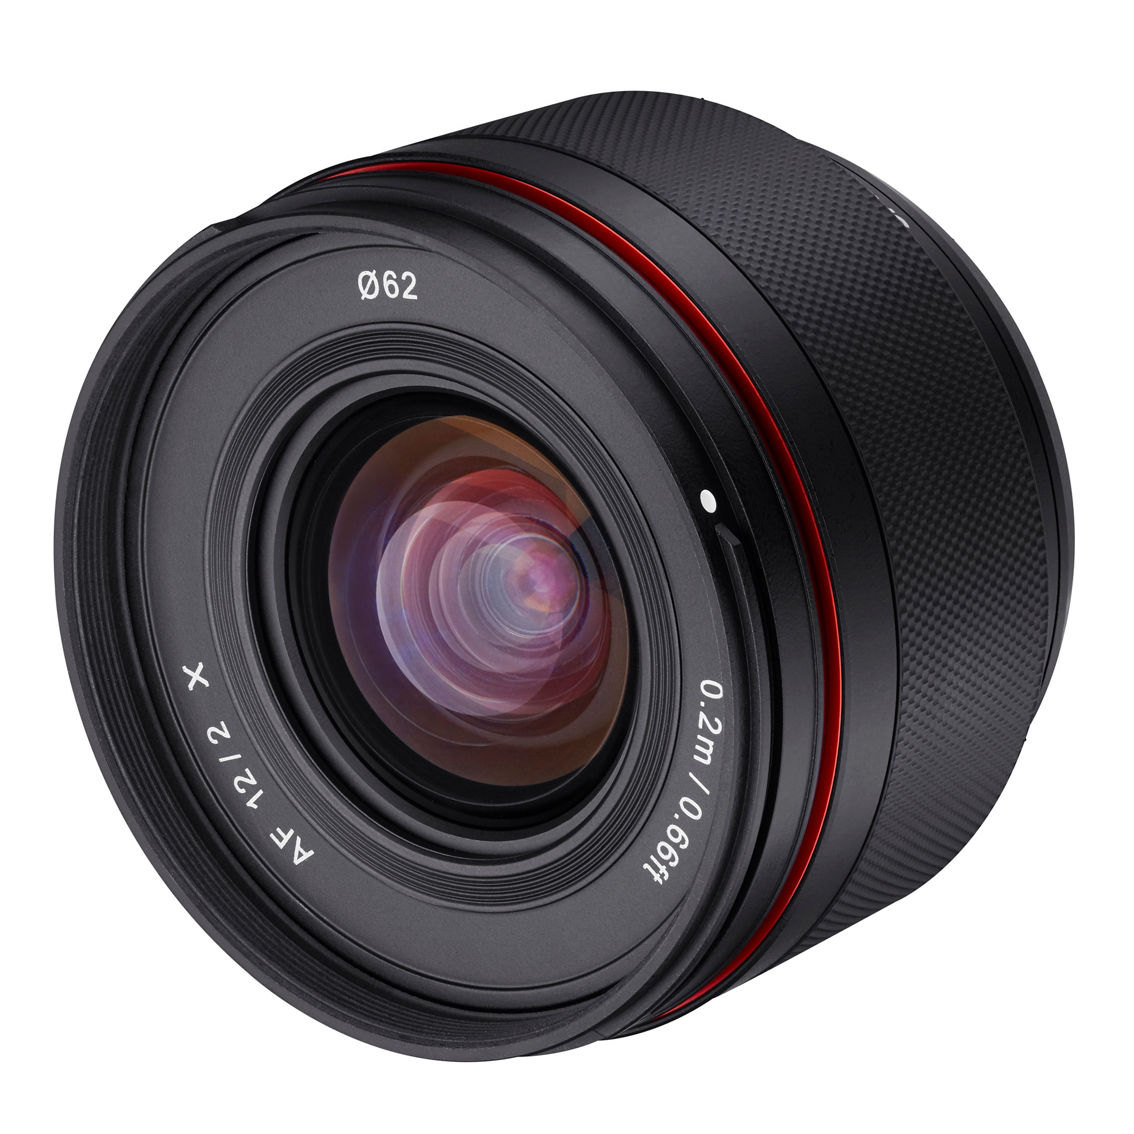 Rokinon 12mm f/2.0 AF APS-C Compact Ultra Wide Angle Lens for Fujifilm X - Image 3 of 4